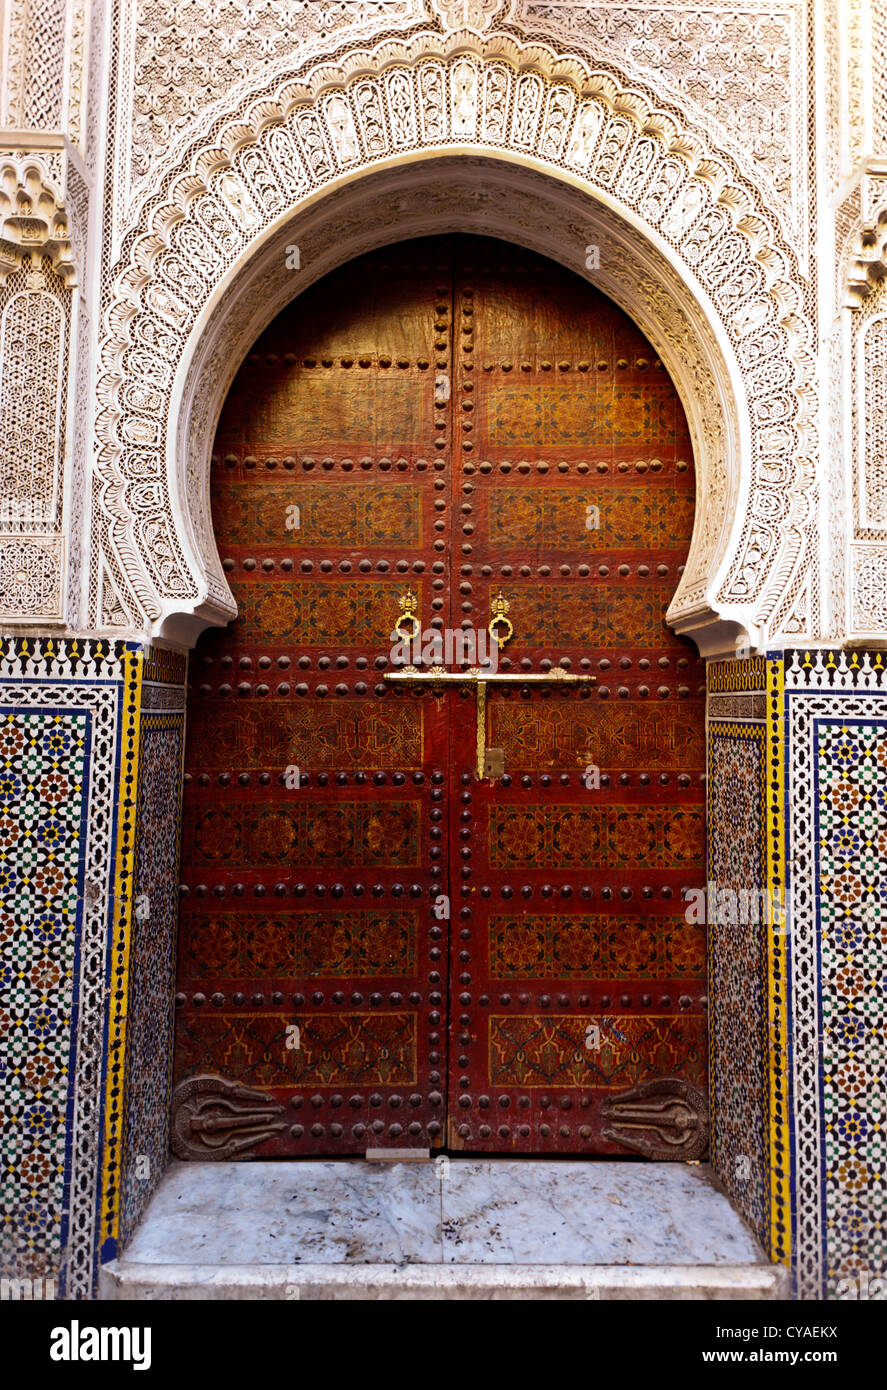 Ornate exterior brass door surrounded by arch decorated with mosaic tile of historic Moorish style building in Fez, Morocco Stock Photo